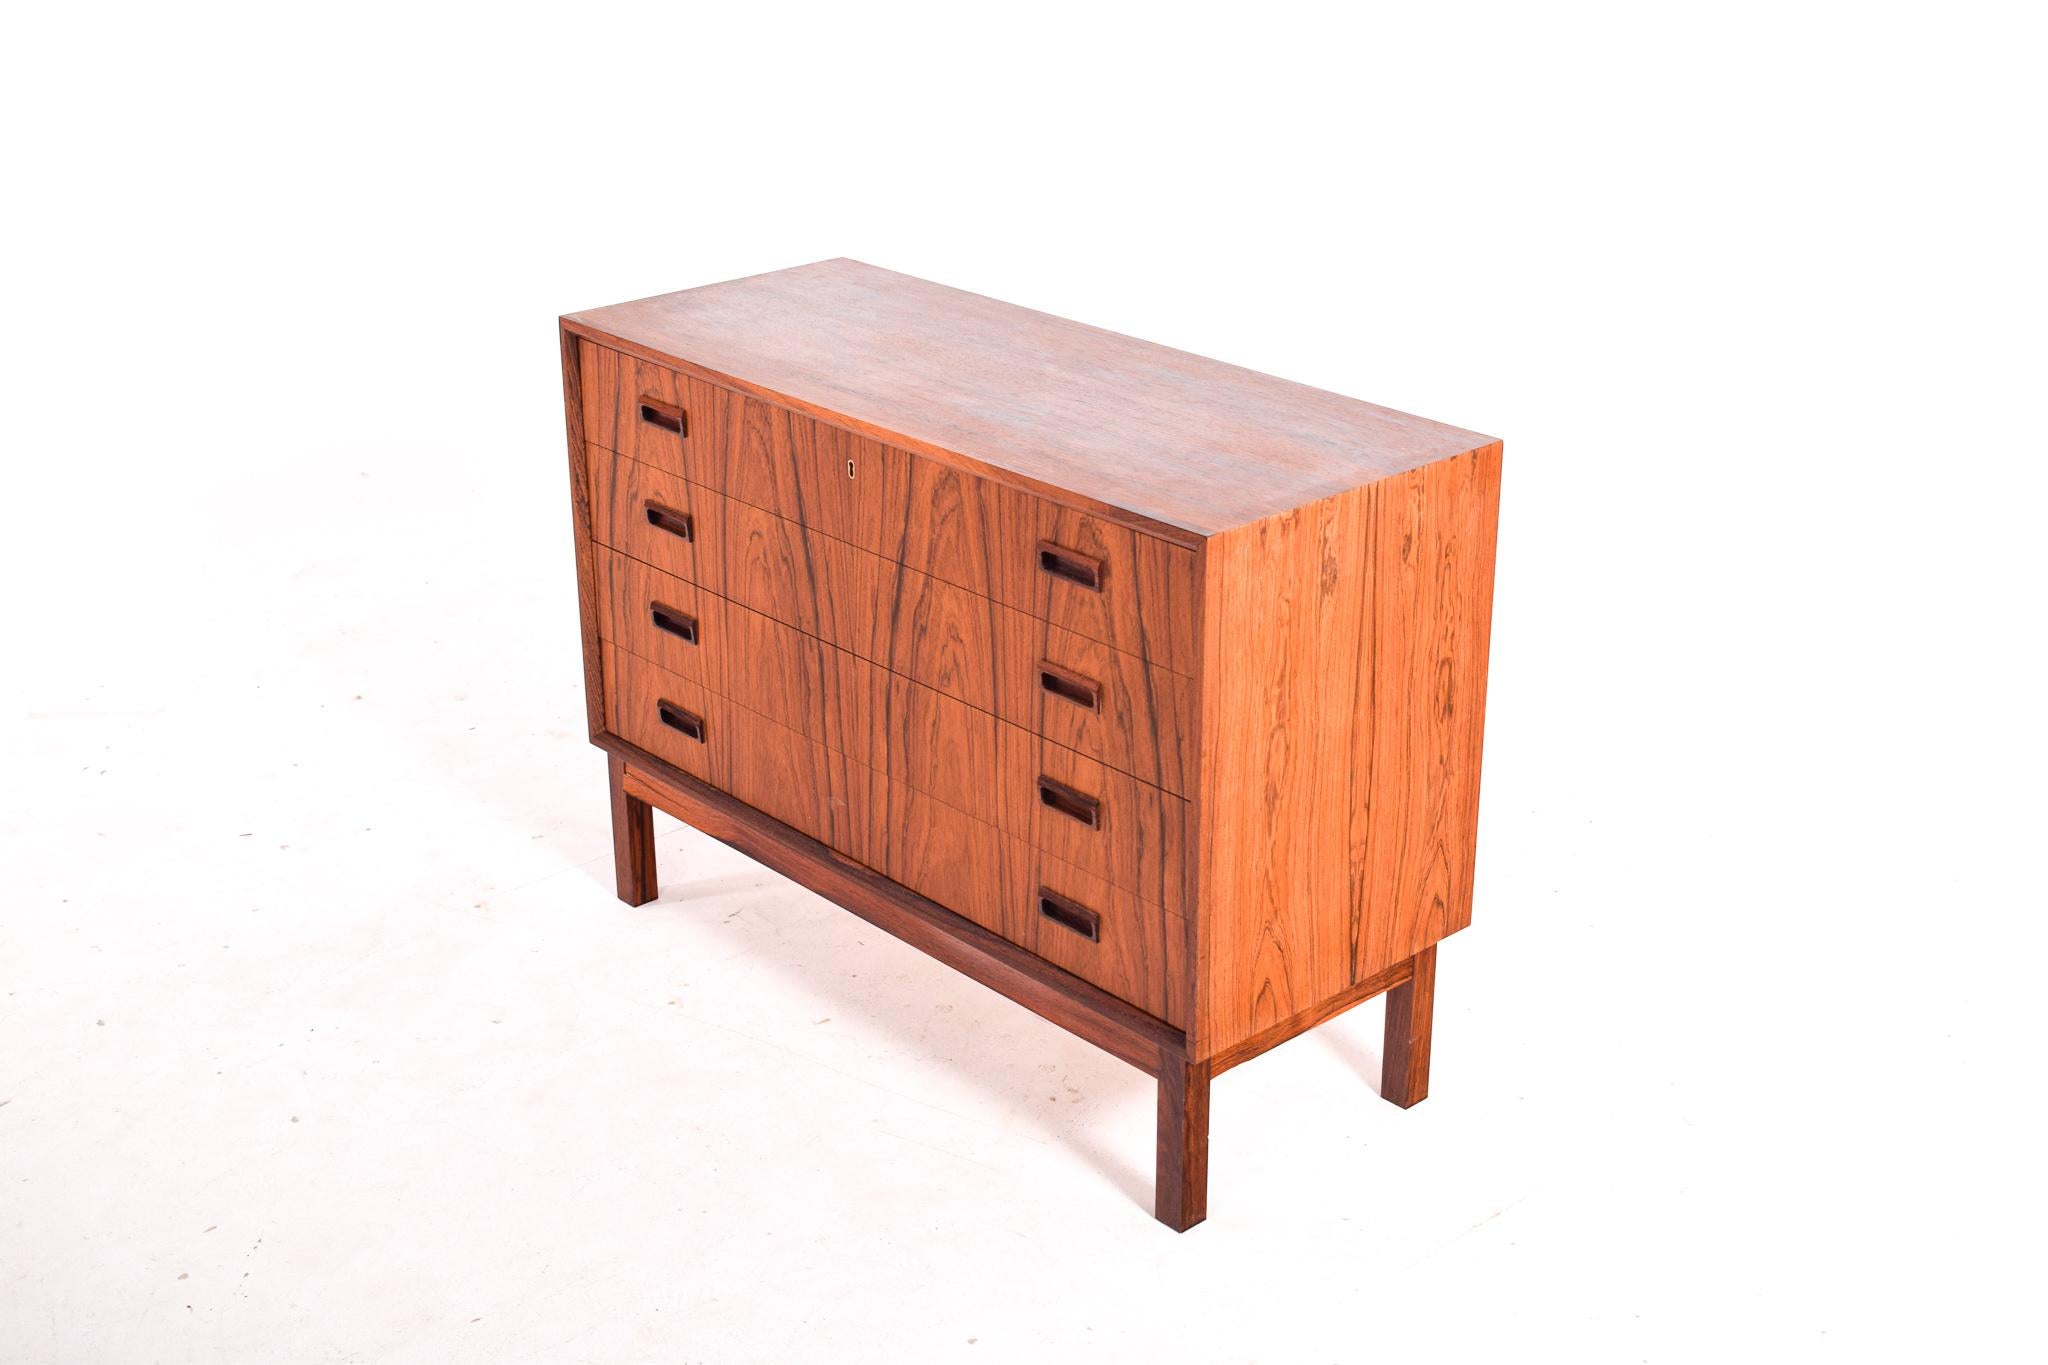 A Mid-Century Modern chest of drawers standing on legs with inset handles. It has four drawers that all run smoothly, one of the drawers has a lock. The chest has been refinishing and is in excellent condition.